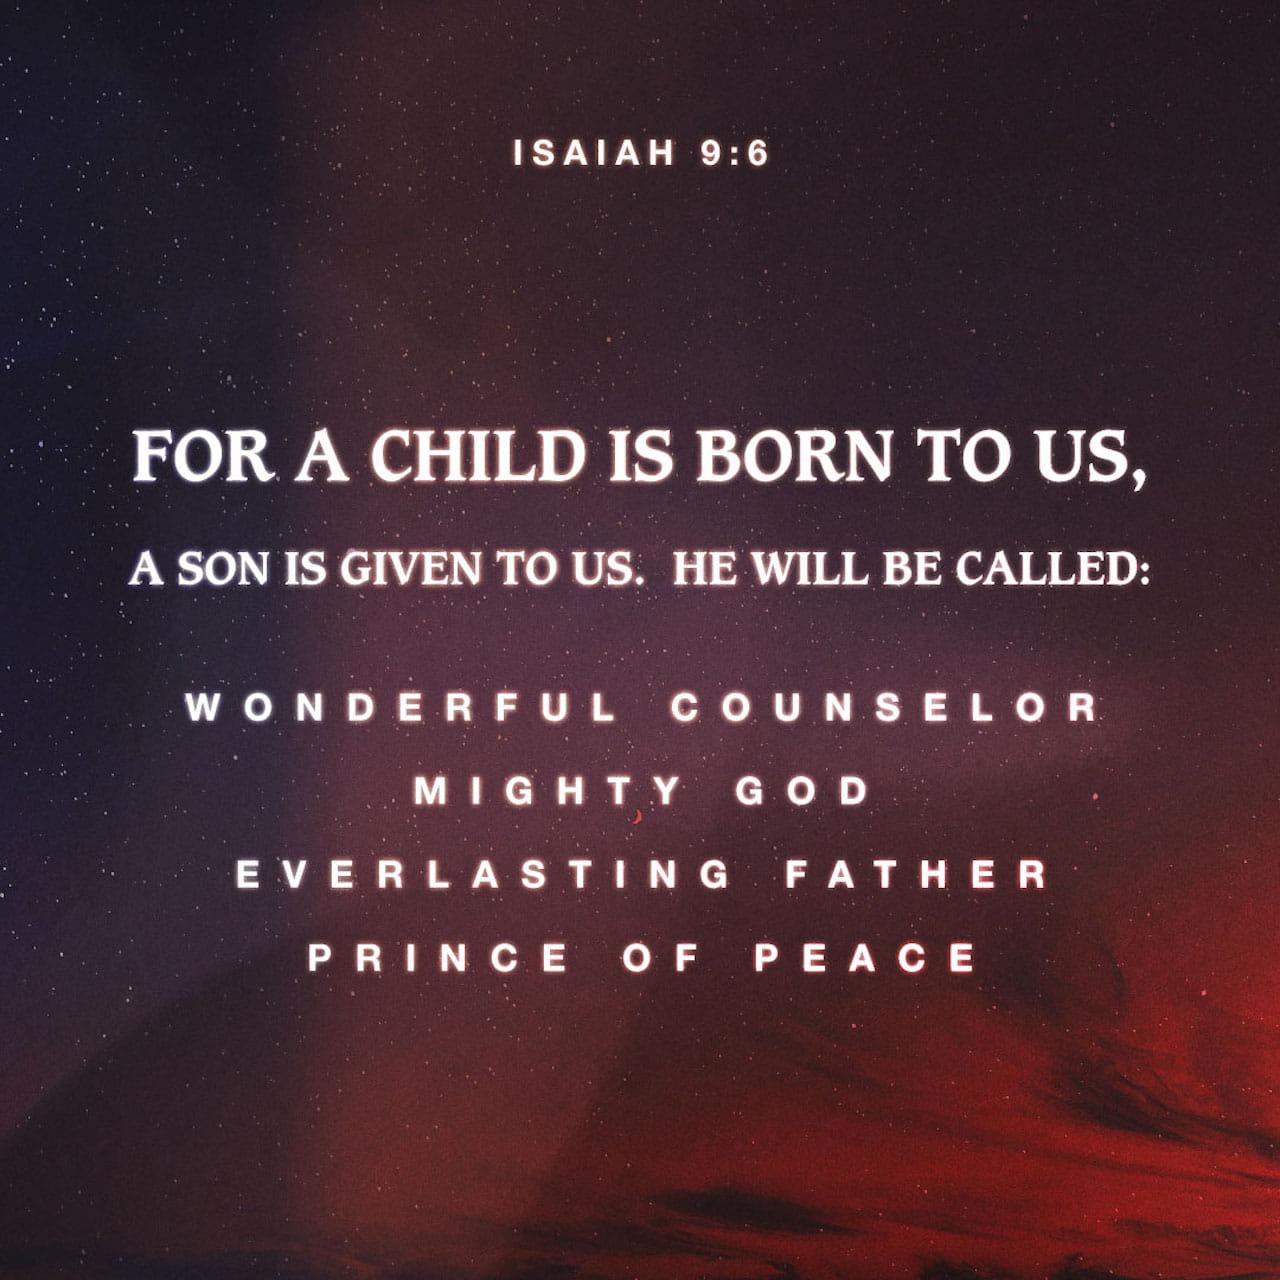 Bible Verse of the Day - day 83 - image 81629 (Isaiah 9:1-7)